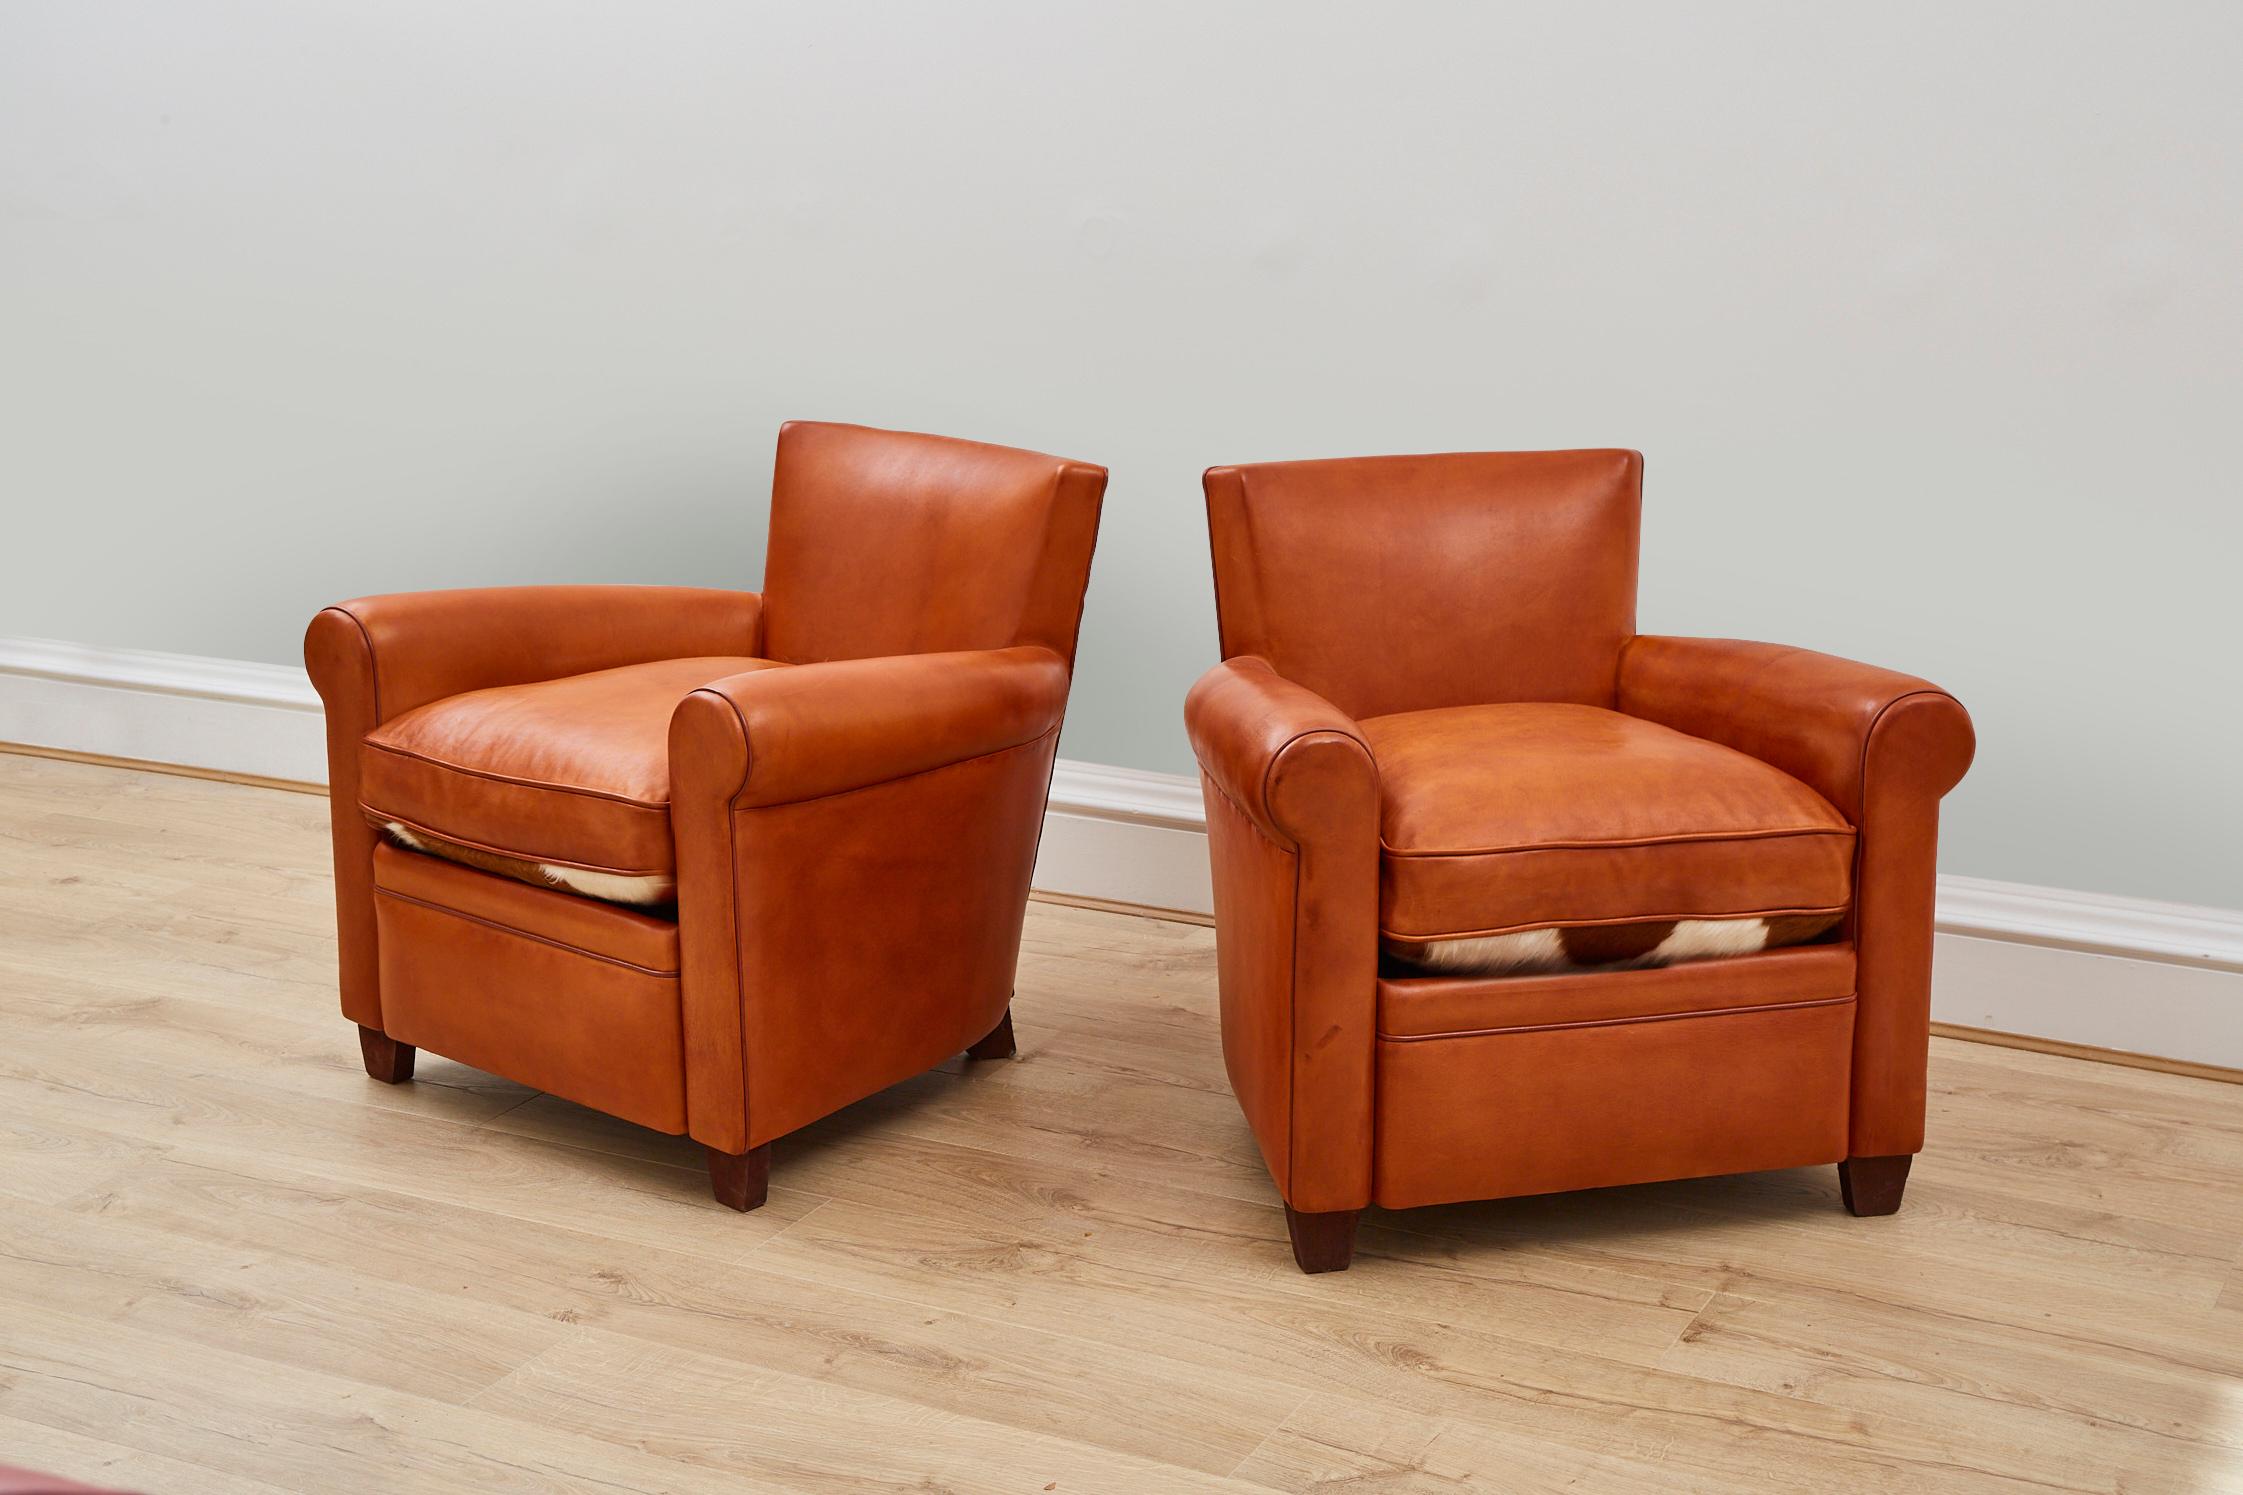 Modern Pair of Tan Leather Club Chair with Cow Skin Cushions